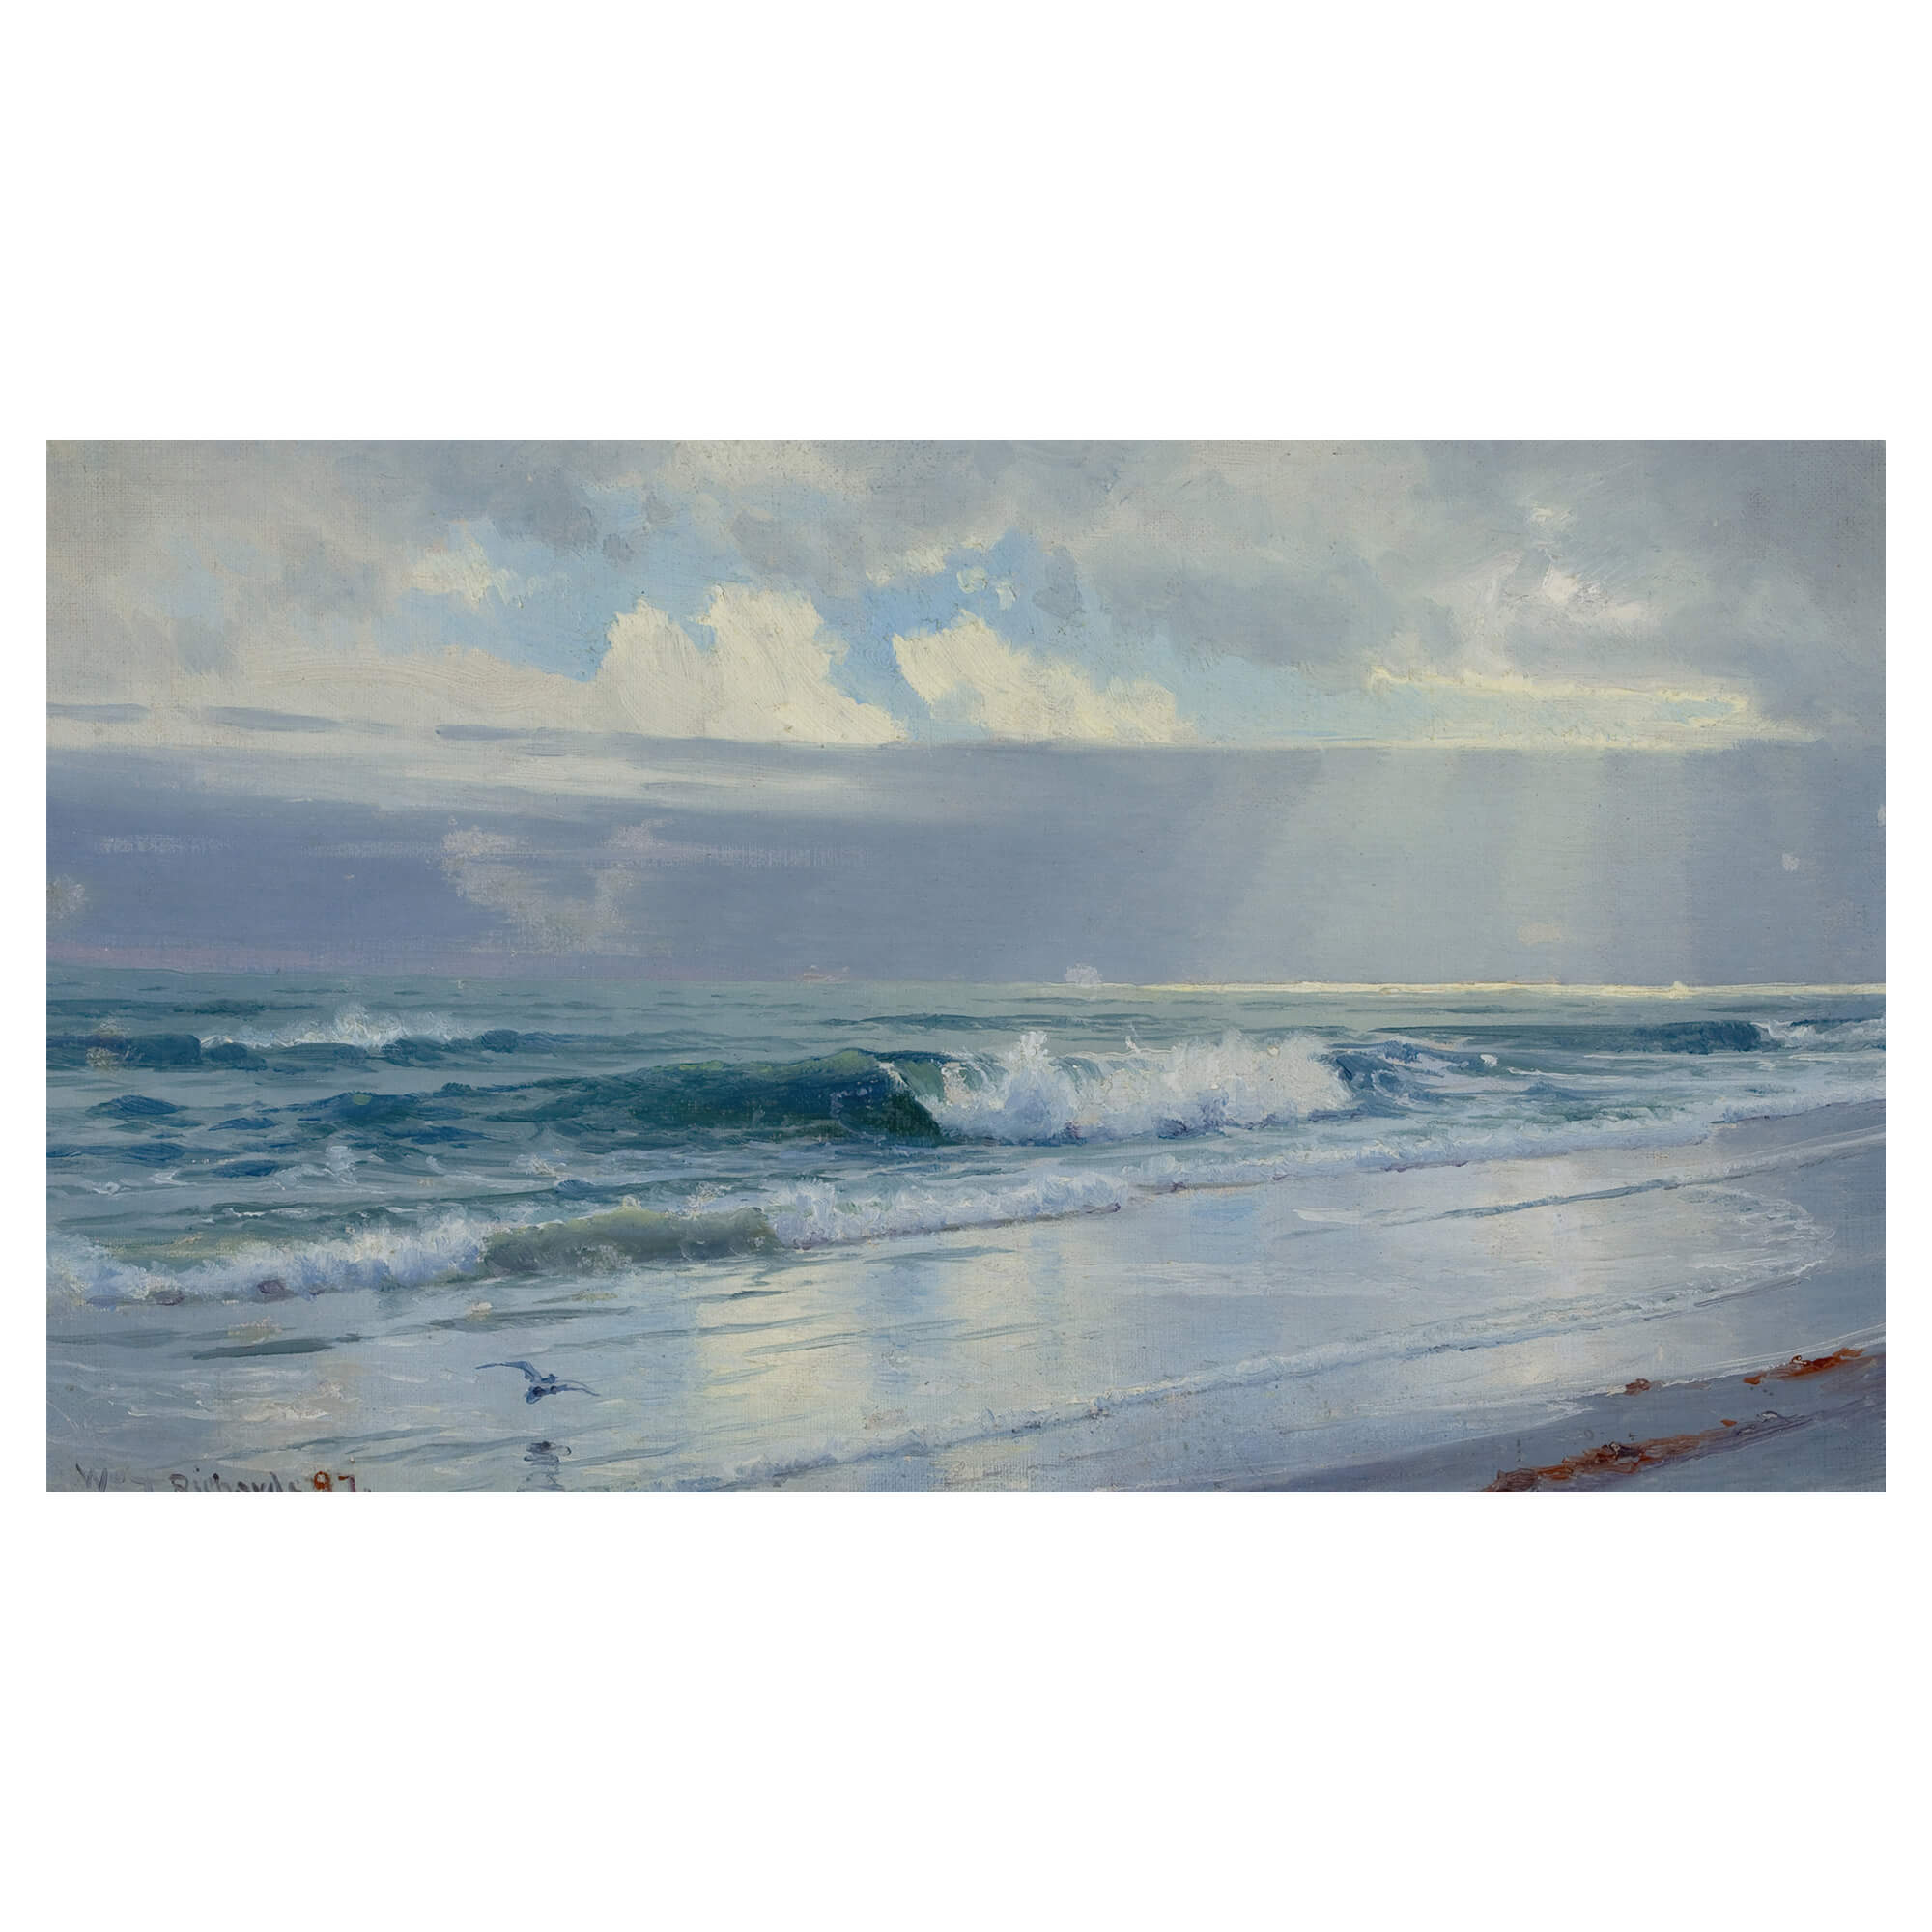 Vintage painting of a seascape with gentle crashing waves